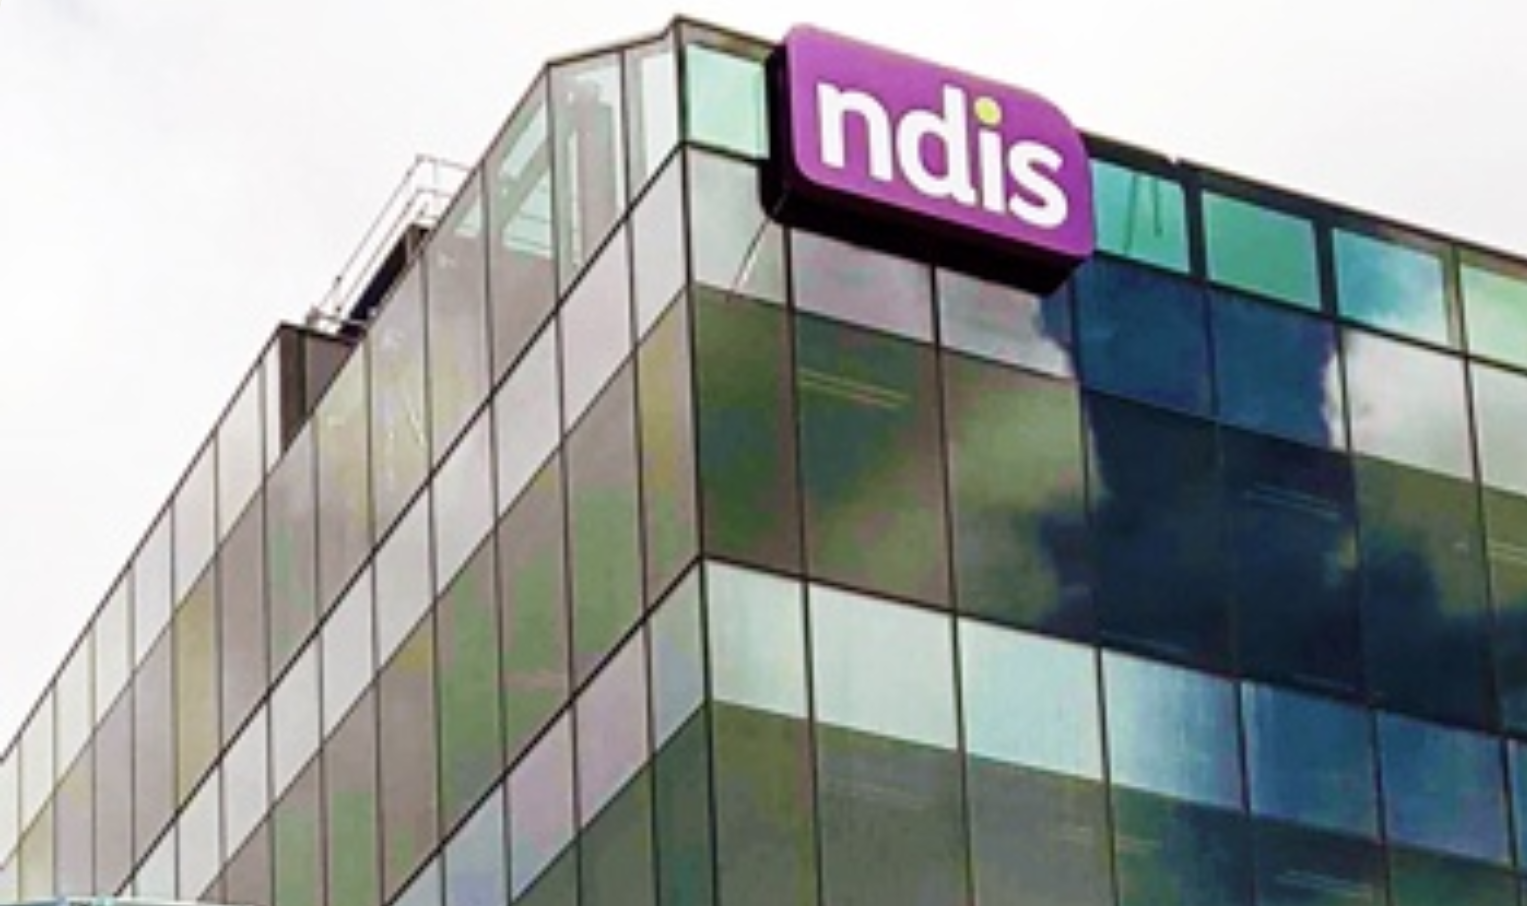 Data of 645 NDIS participants caught in HWL Ebsworth breach